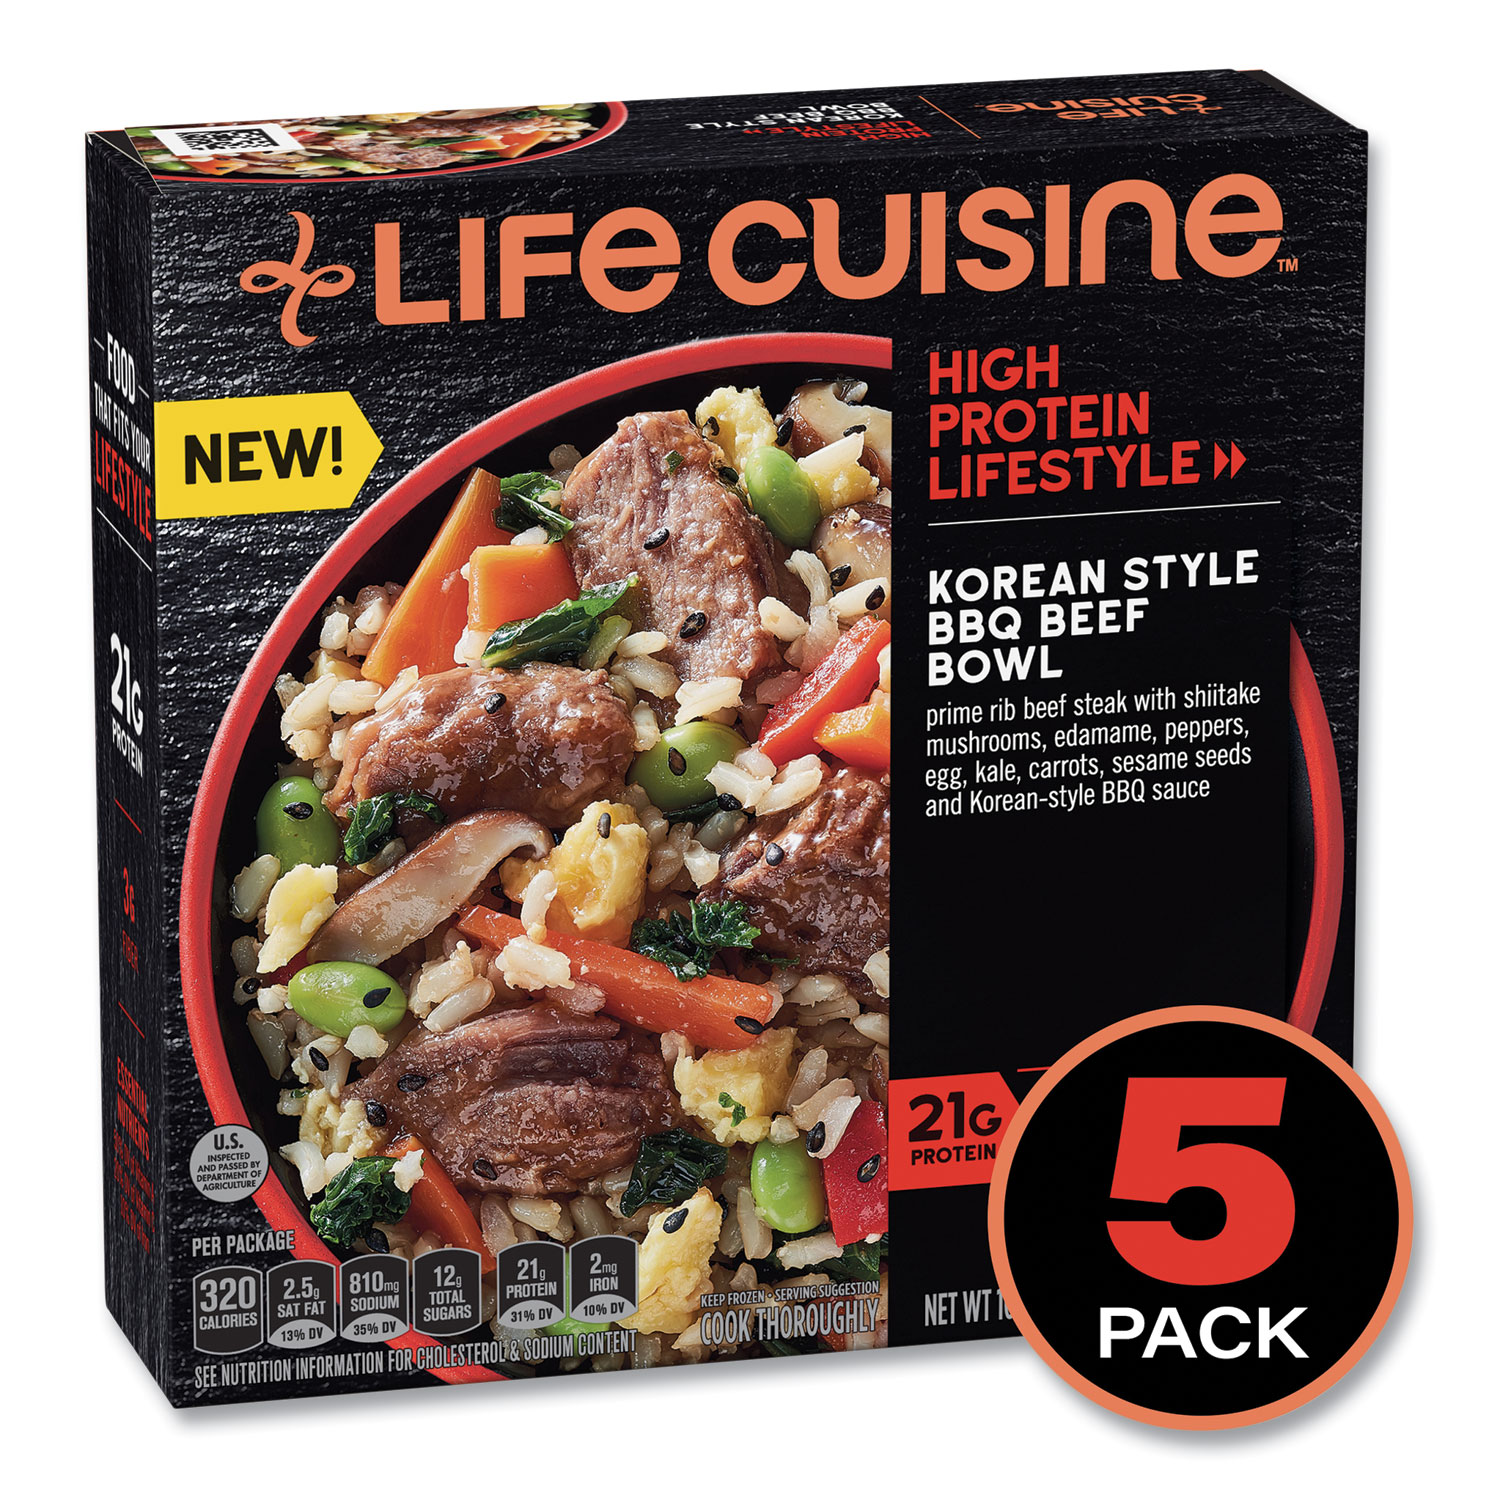  Life Cuisine 12425929 High Protein Lifestyle Korean Style BBQ Beef Bowl, 10 oz Bowl, 5/Pack, Free Delivery in 1-4 Business Days (GRR90300201) 